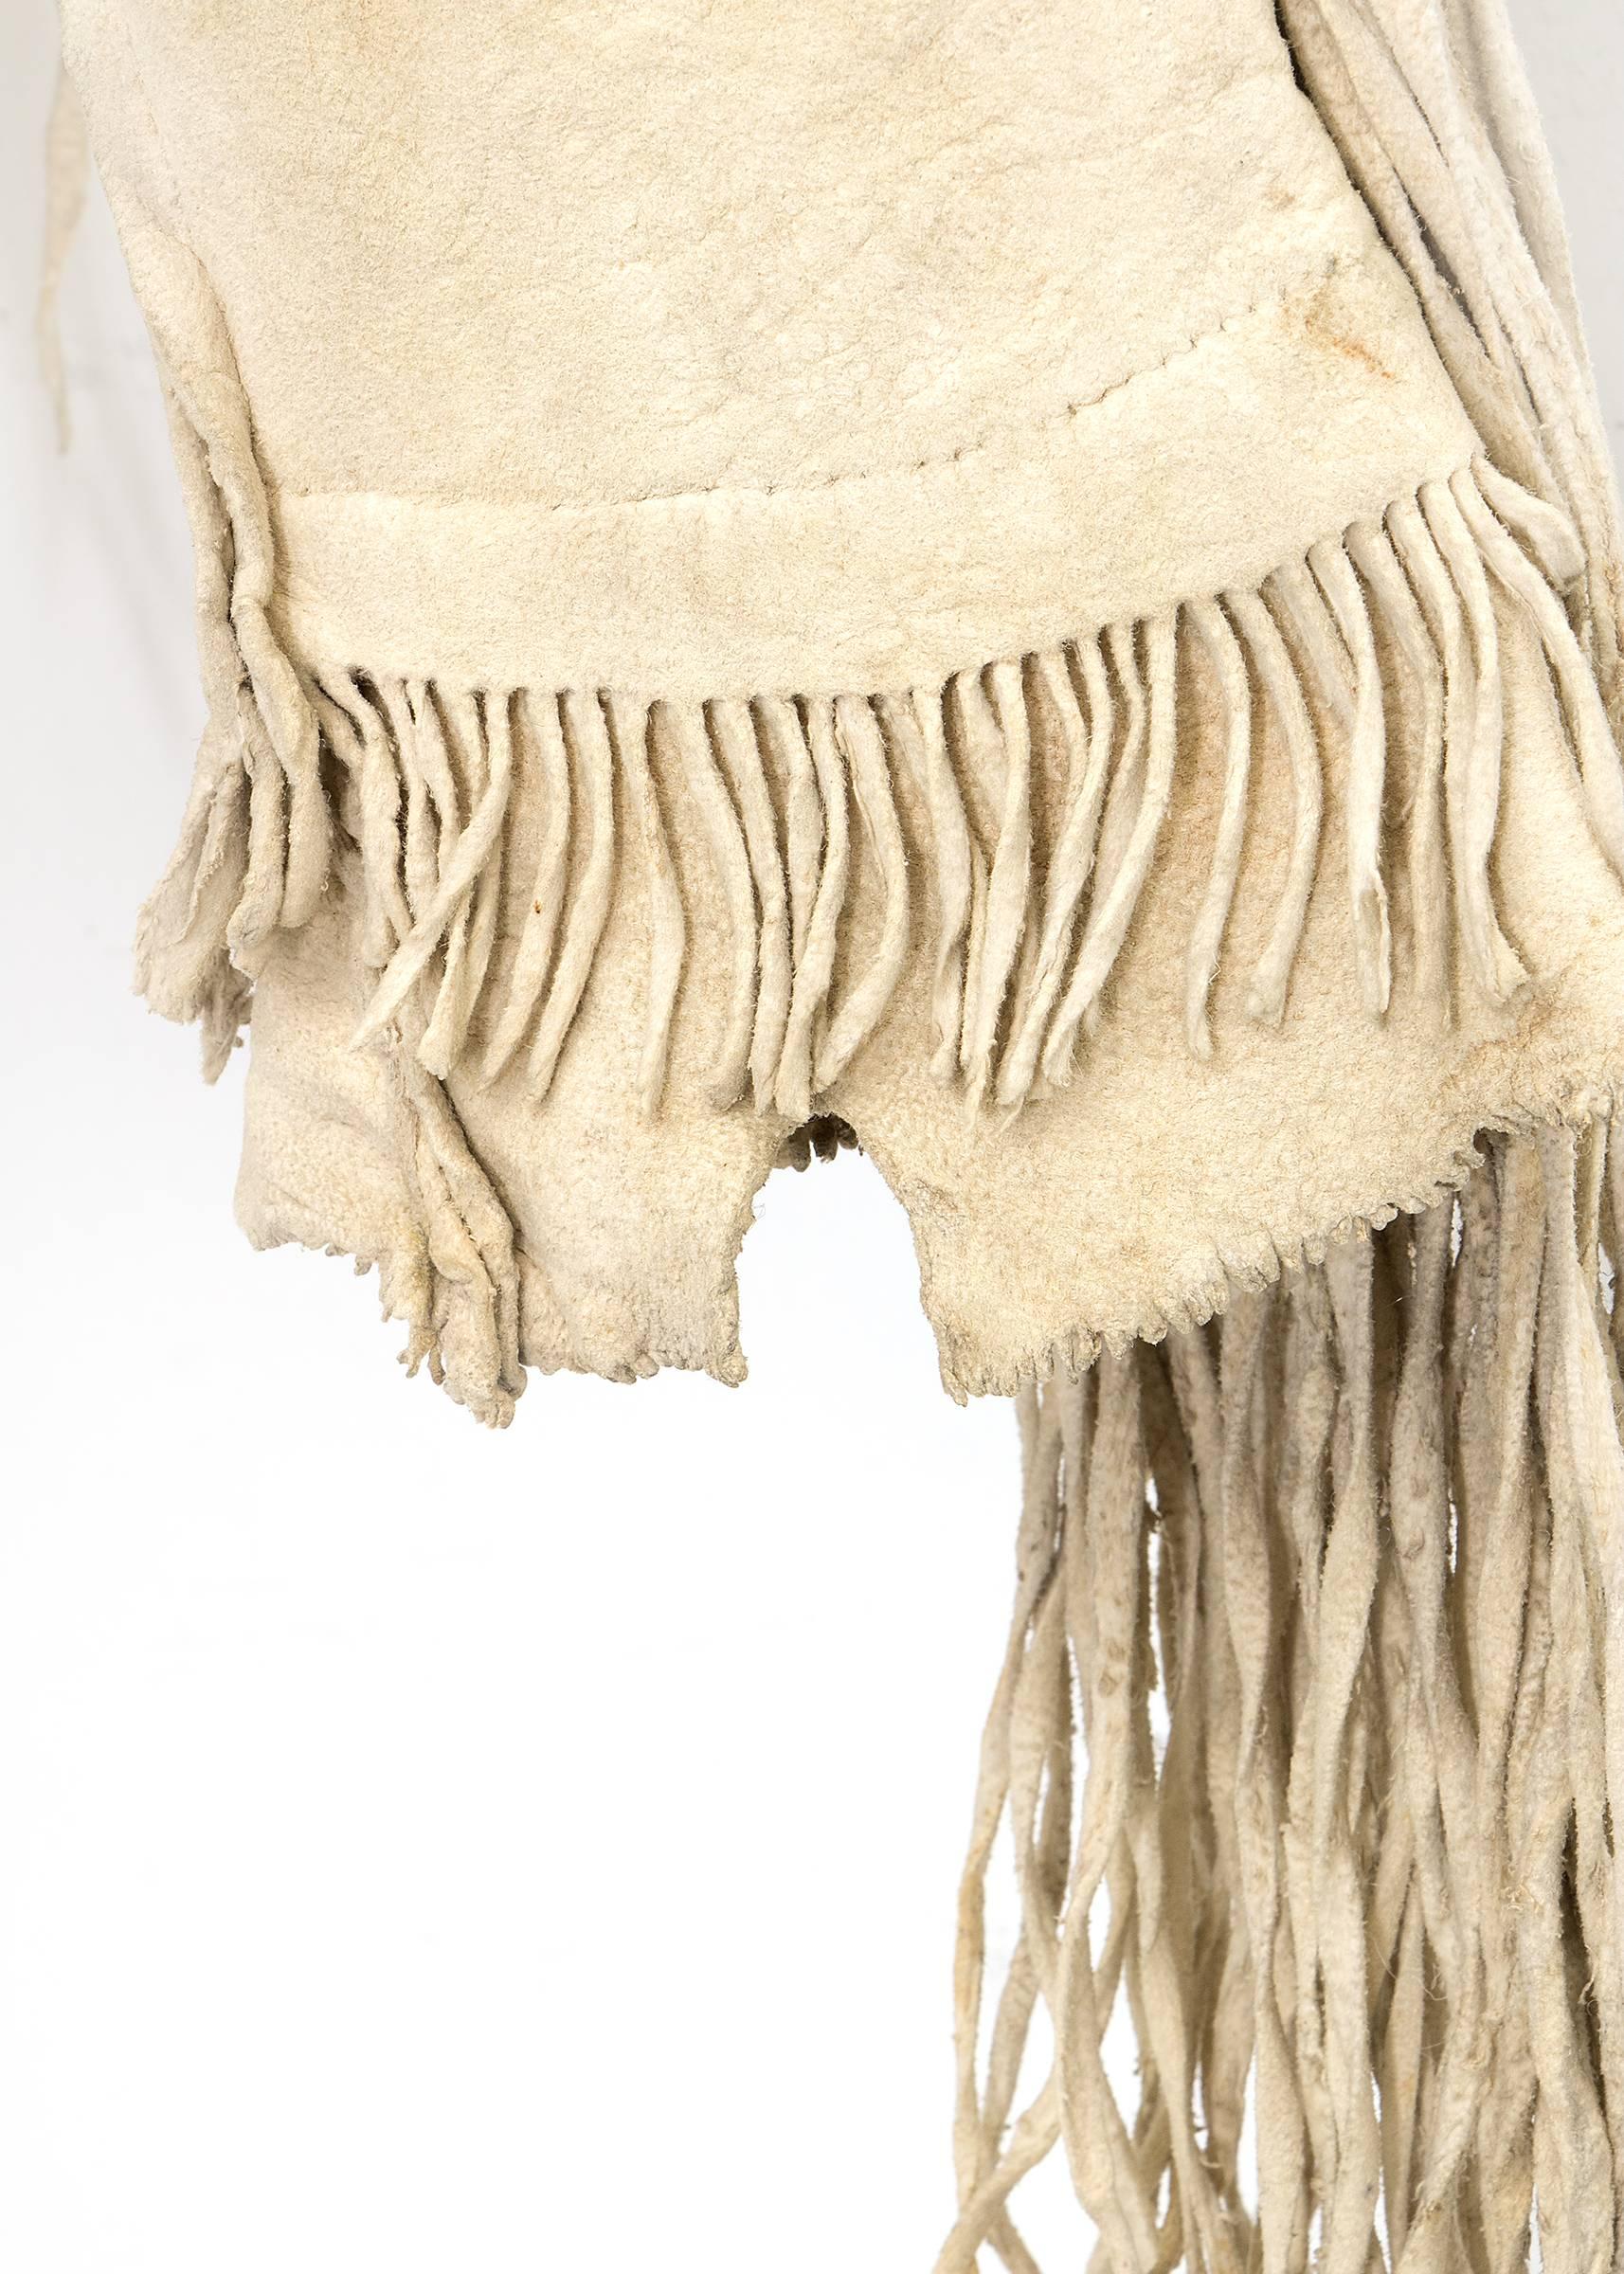 19th Century Antique Native American Boy's Outfit 'Shirt and Leggings', Apache, circa 1880